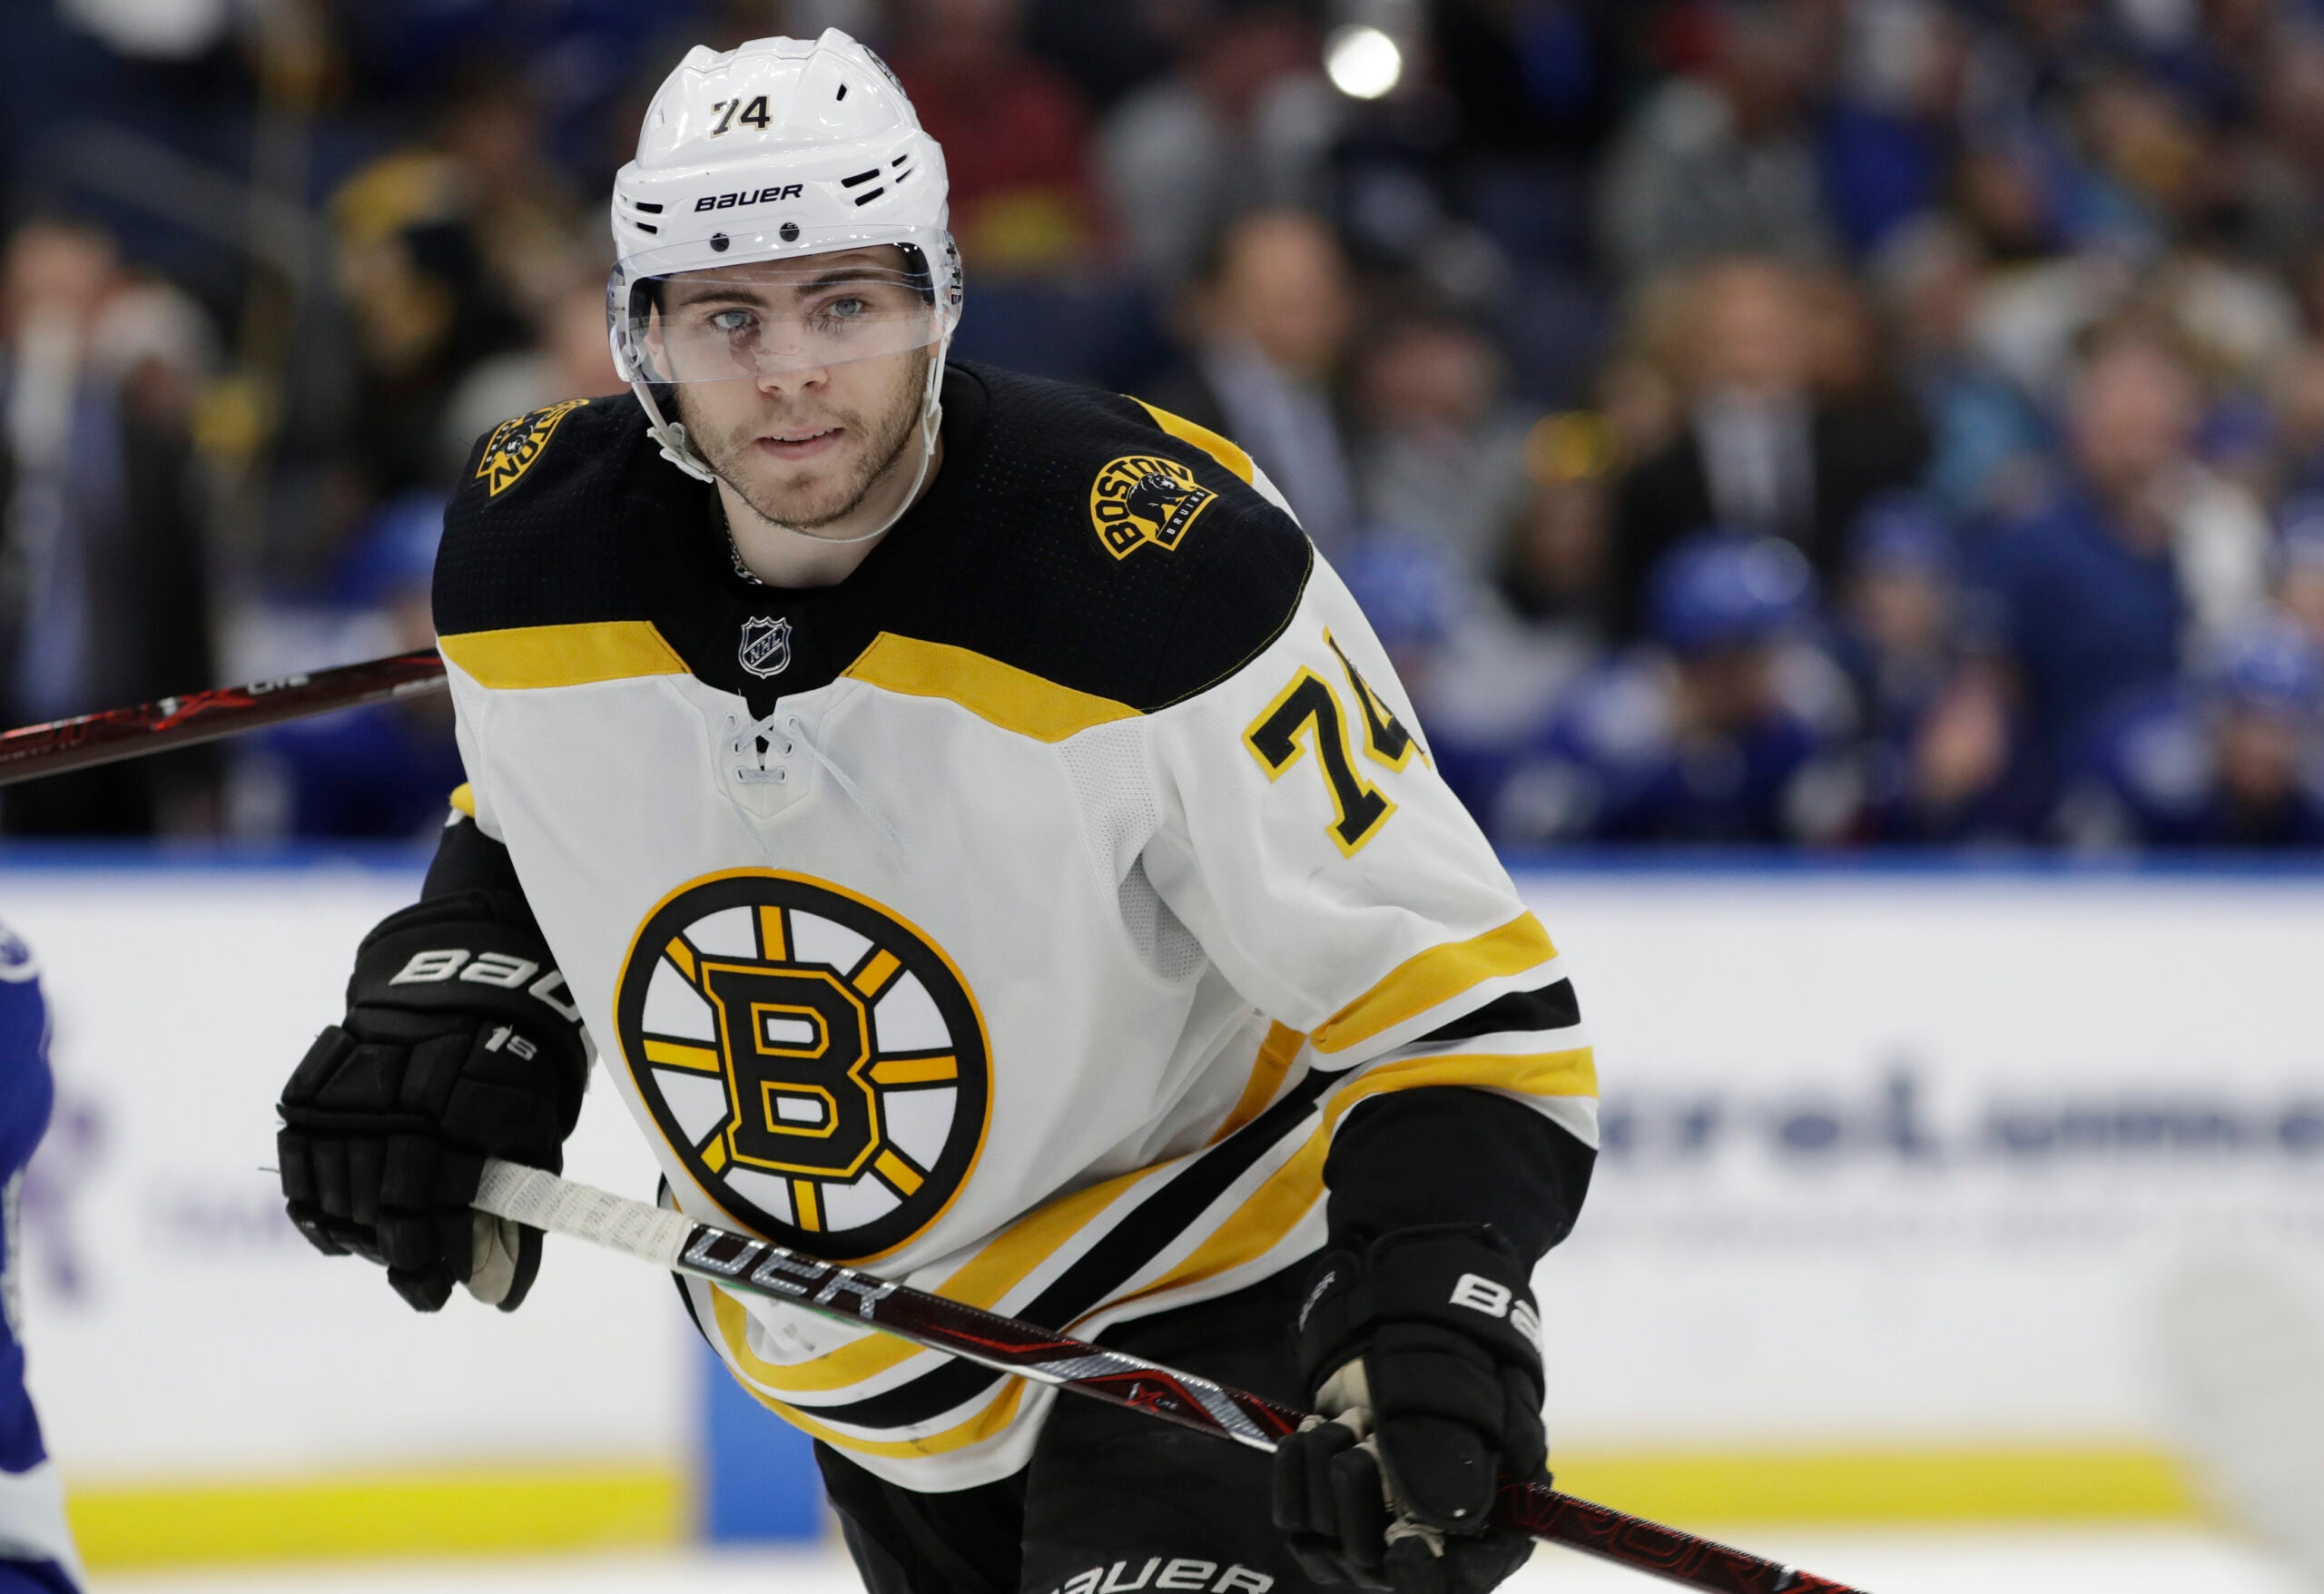 Is Bruins Jake DeBrusk Ready To Enter The Prime Of His Career?